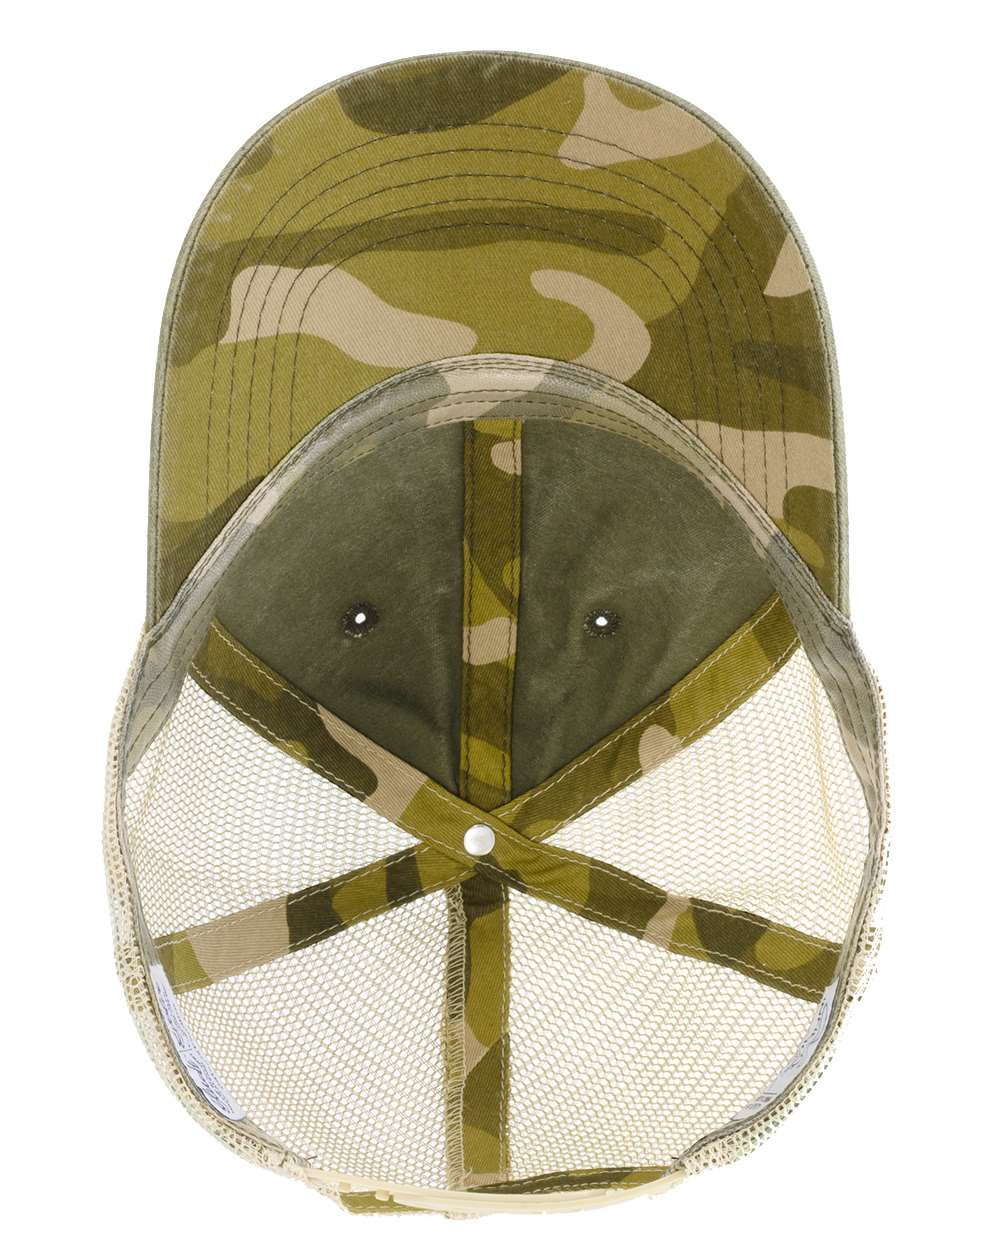 406 Love embroidered Olive/Camo ponytail hat